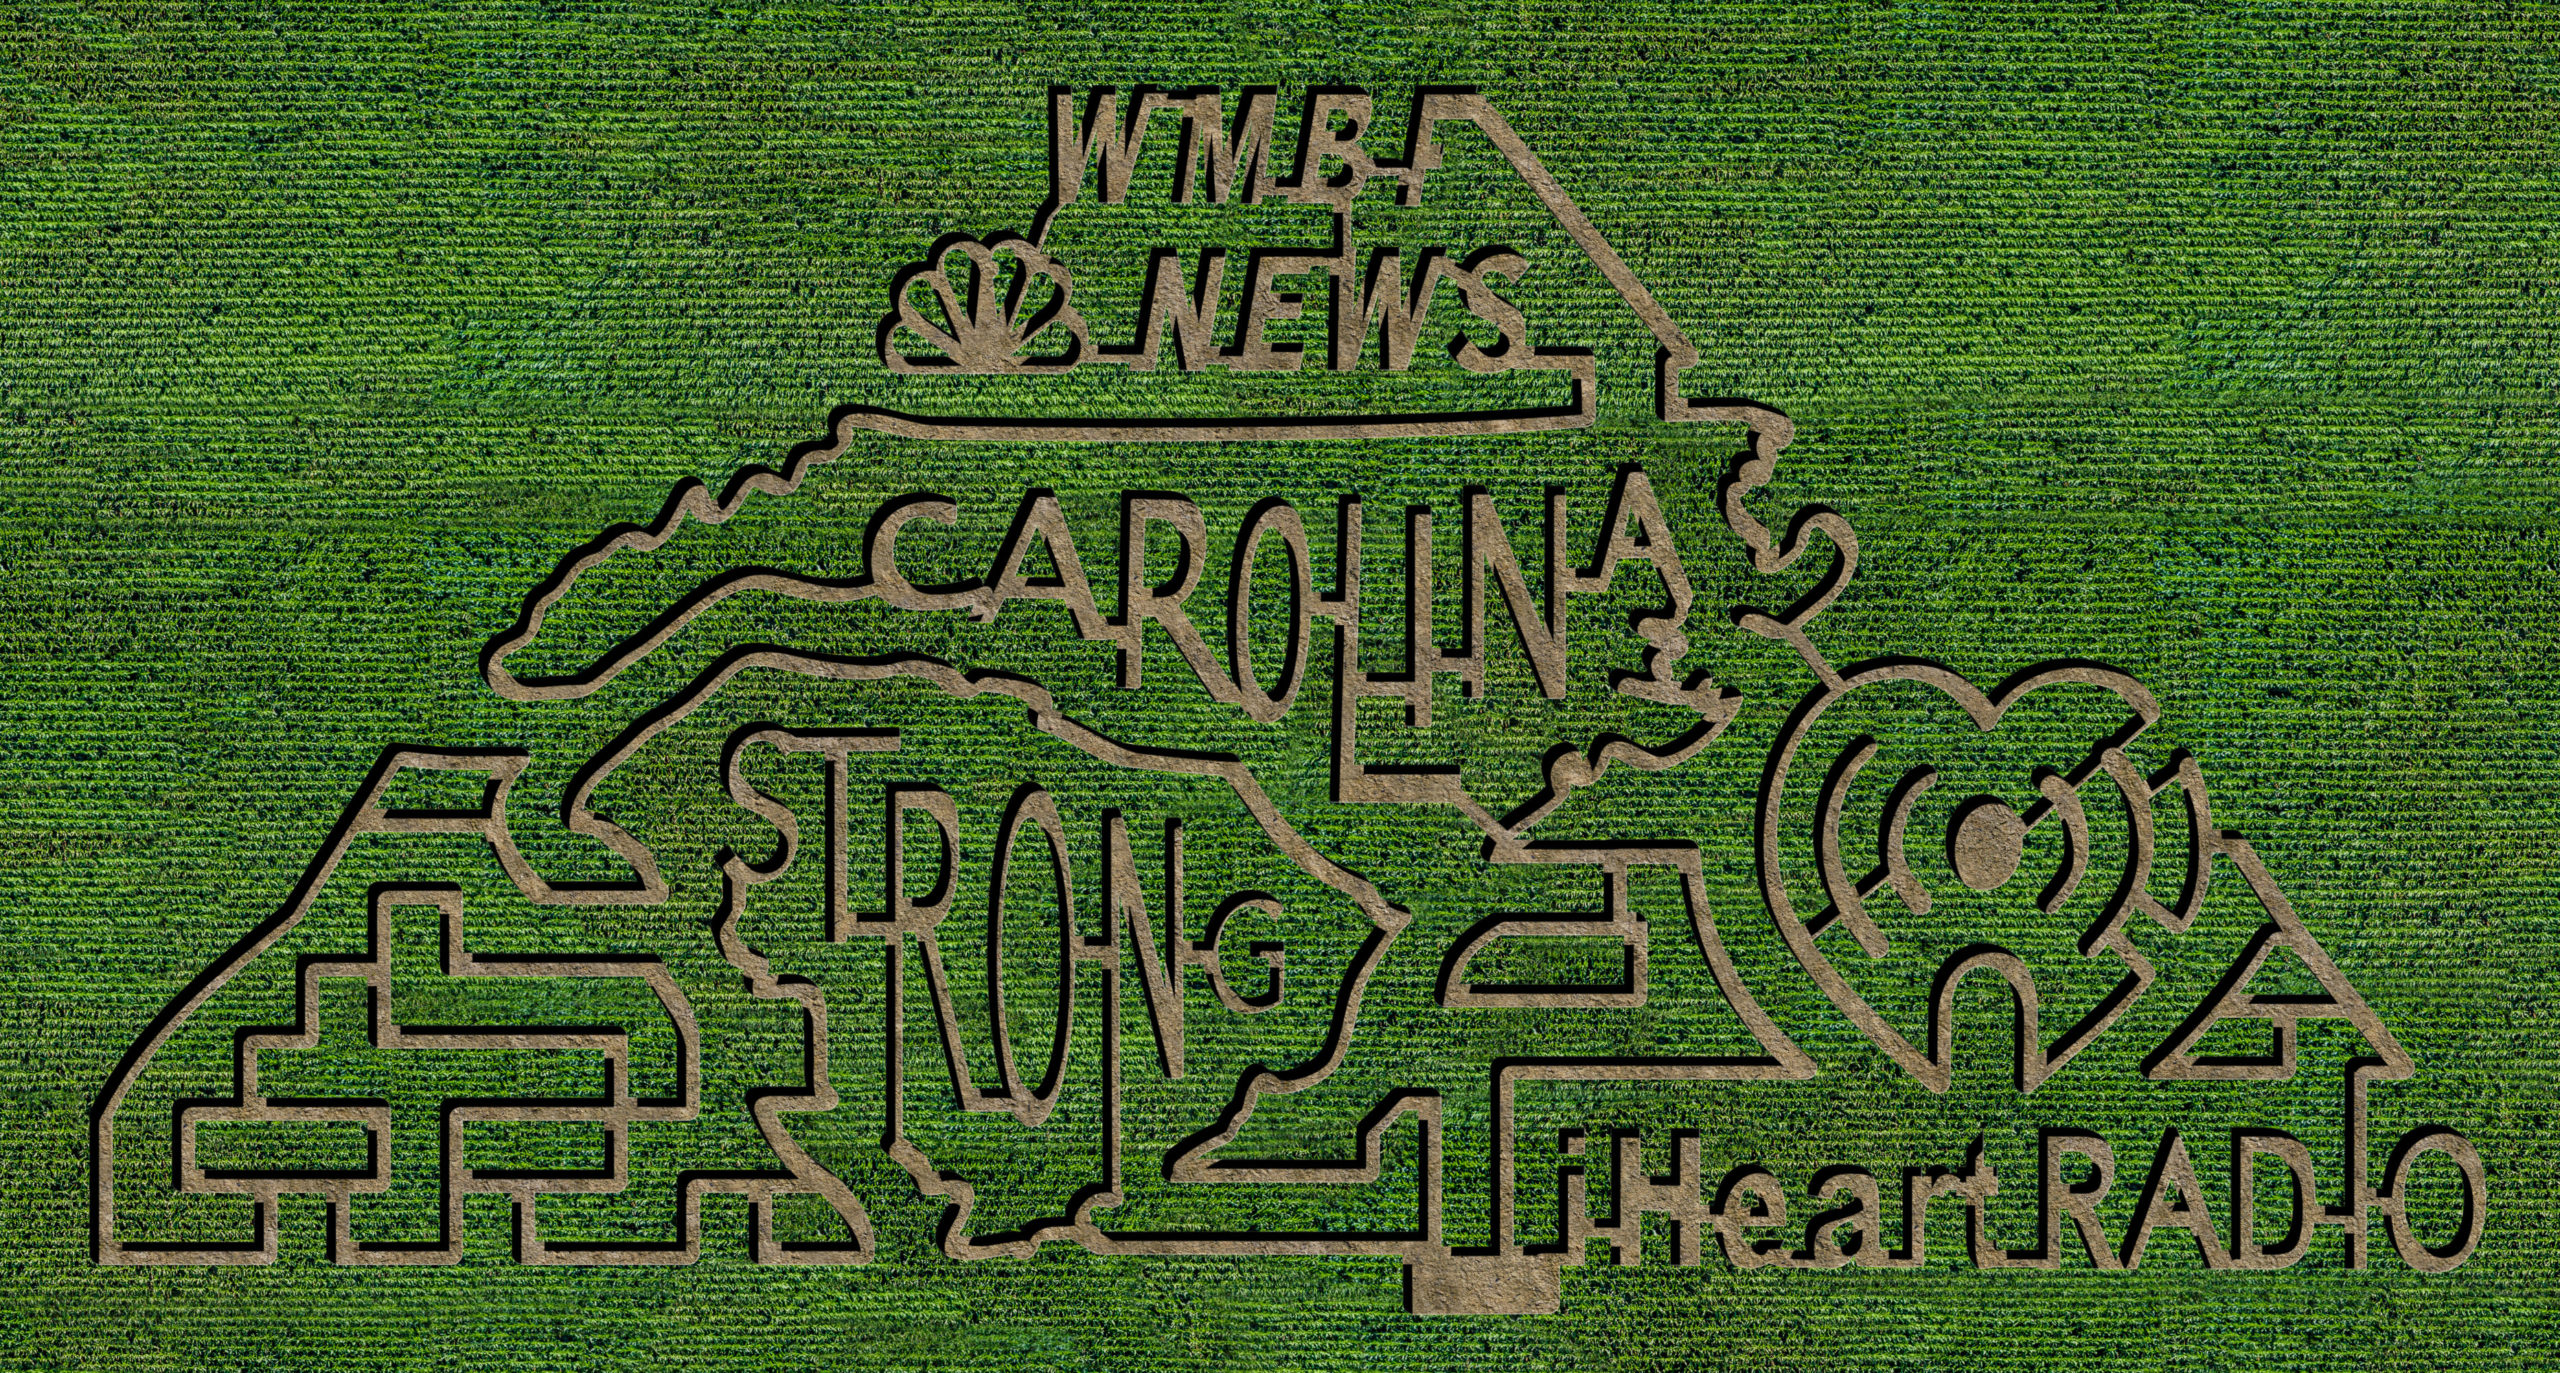 A corn maze with the words " wmbnews carolina strong heart strong strong."